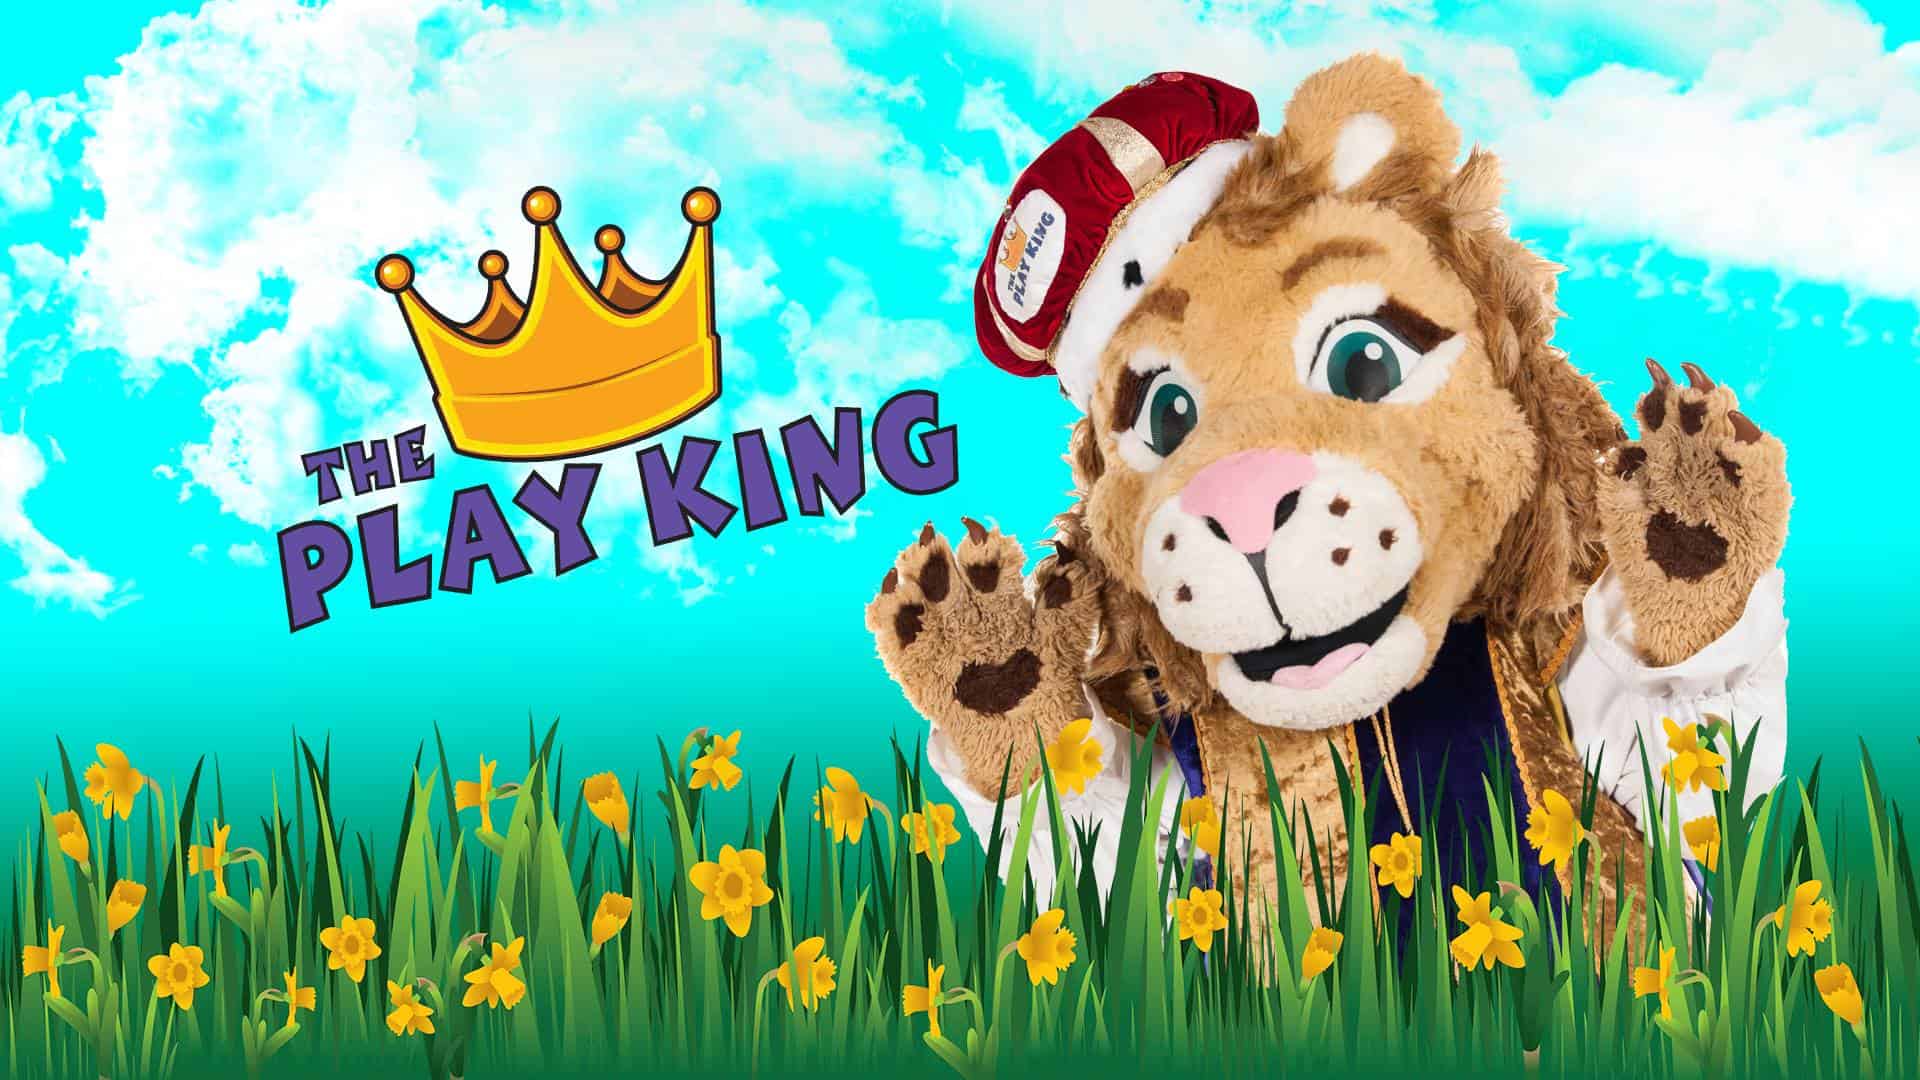 The Play King in UK